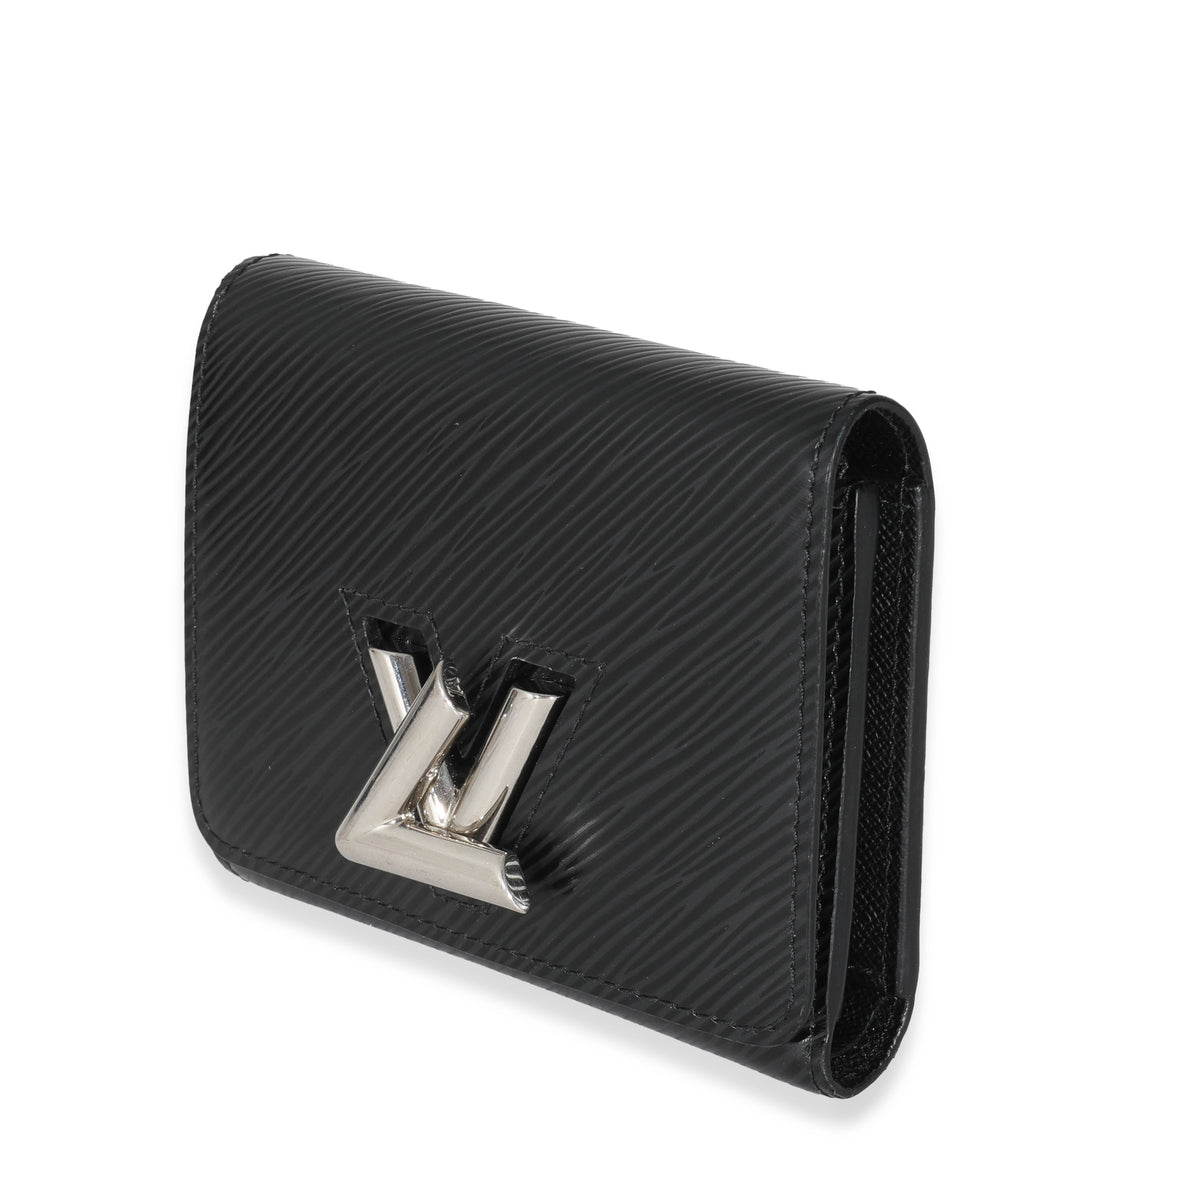 Twist Compact Wallet in Epi Leather, Silver Hardware